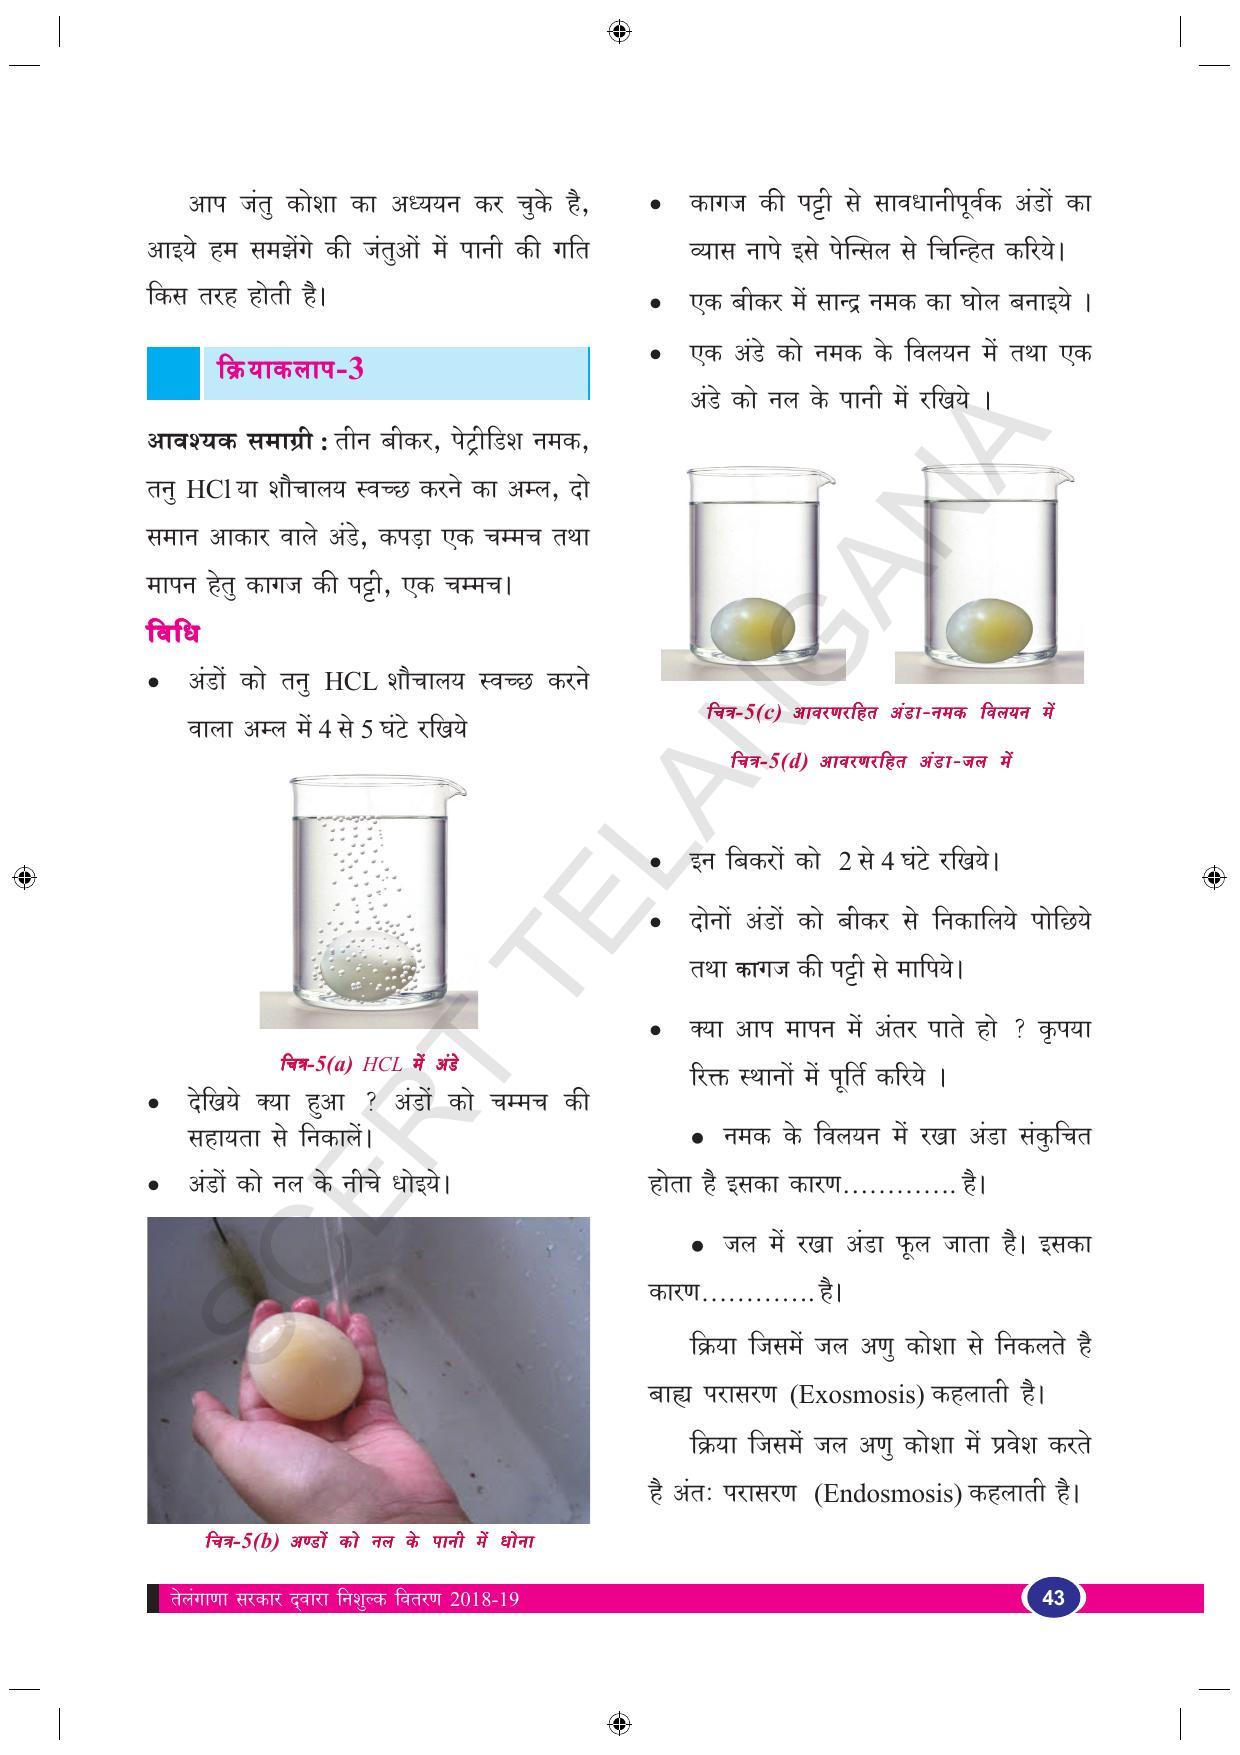 TS SCERT Class 9 Biological Science (Hindi Medium) Text Book - Page 55